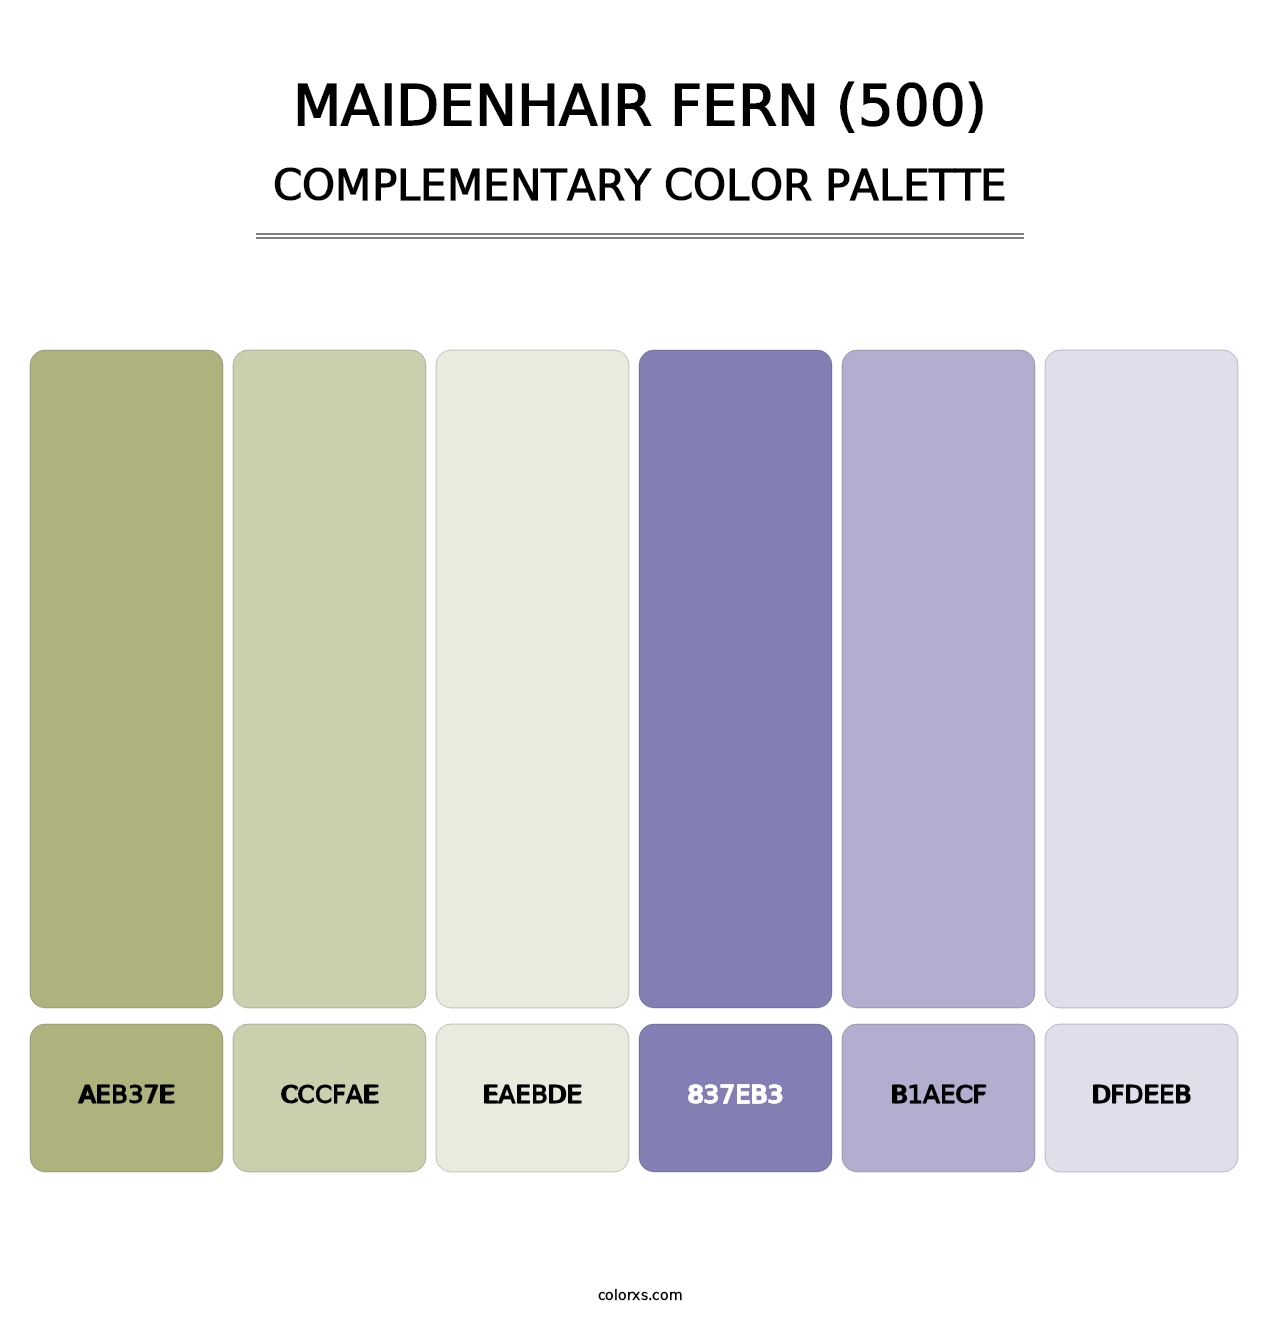 Maidenhair Fern (500) - Complementary Color Palette